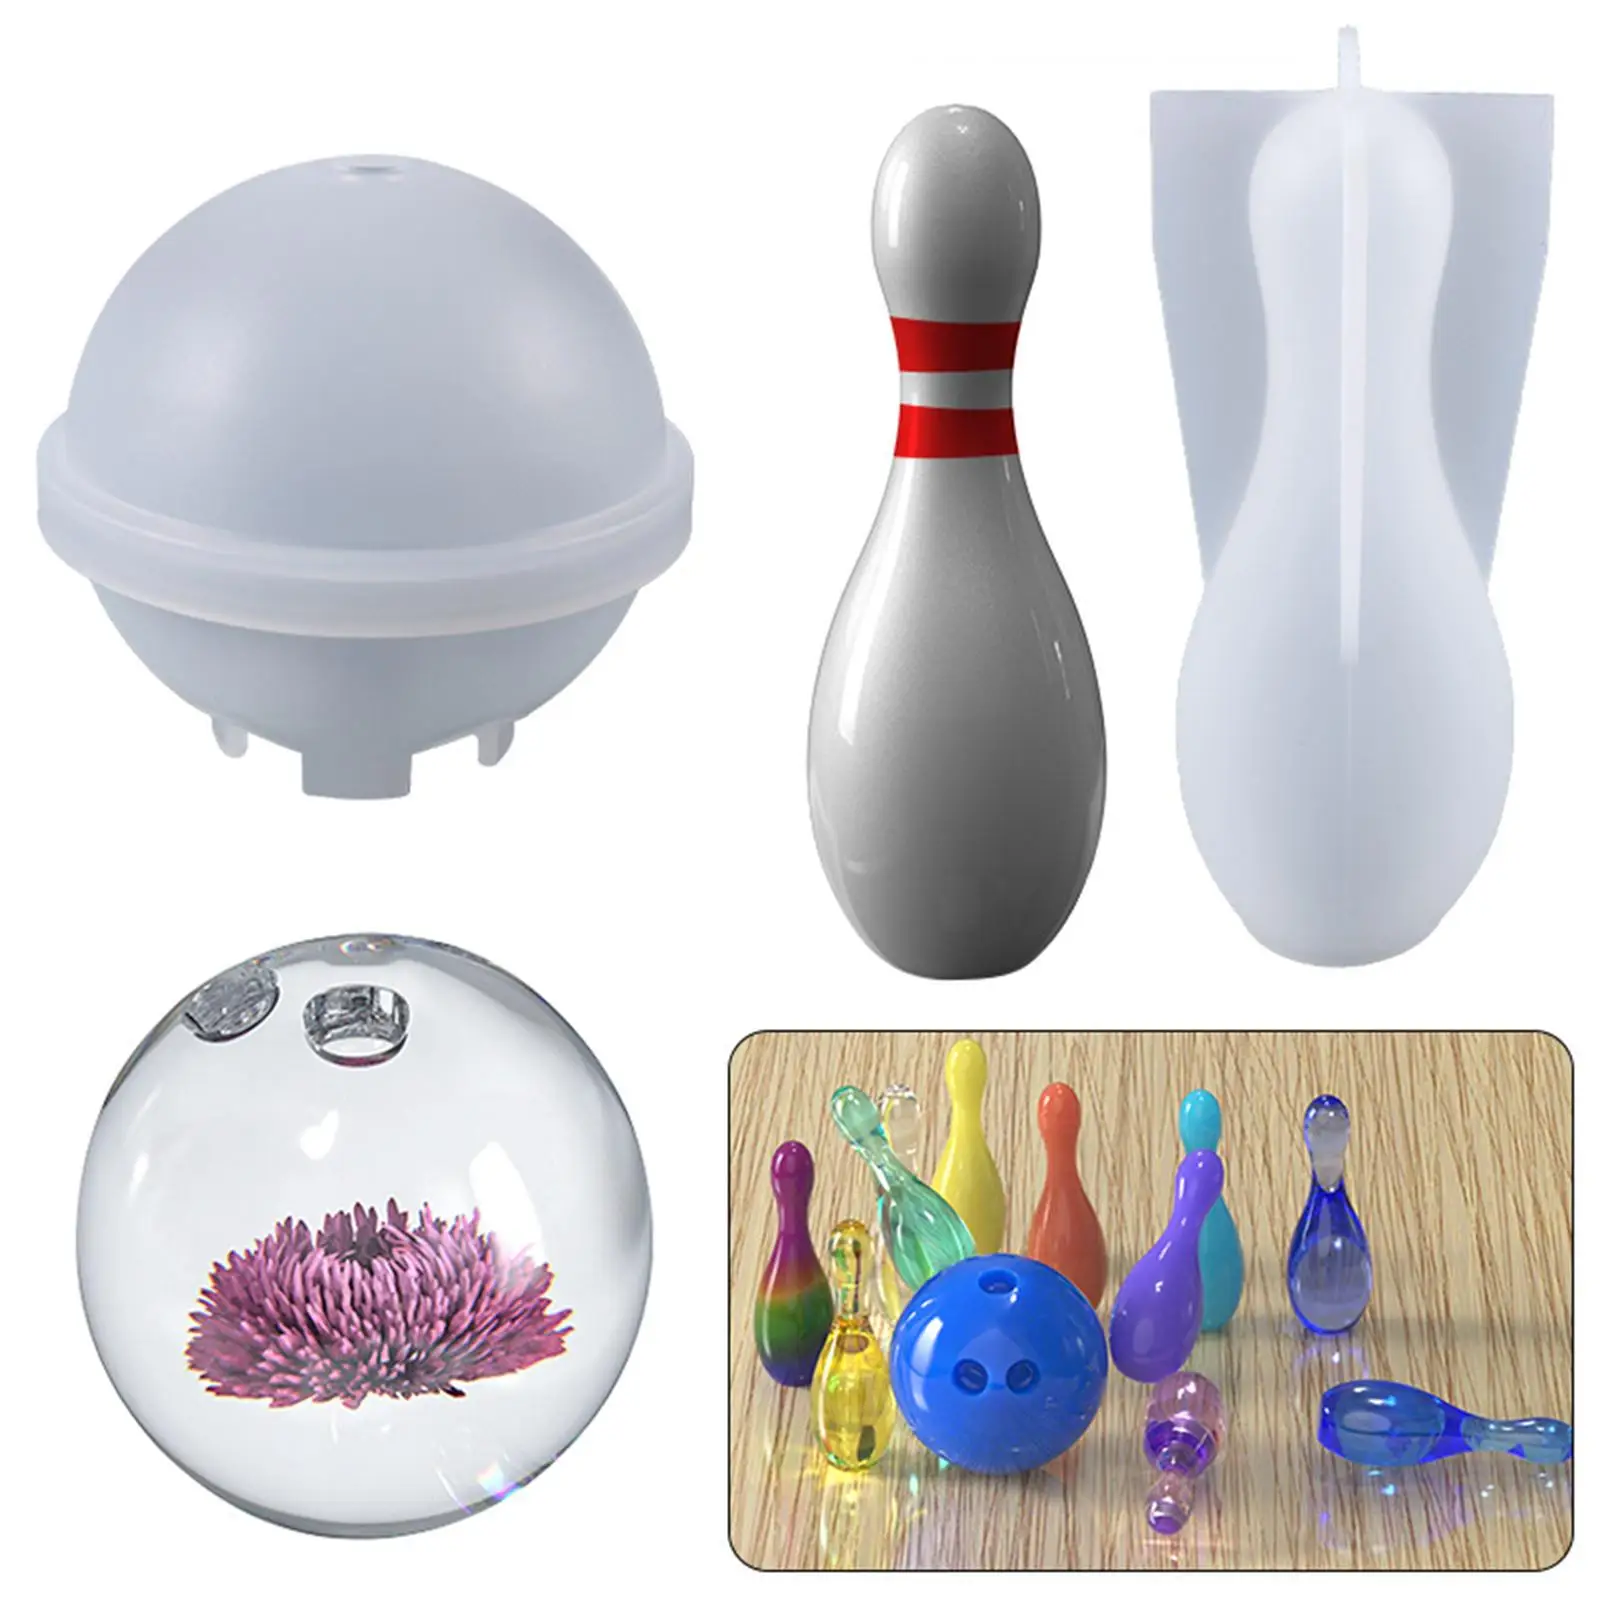 Crystal Bowling Epoxy Resin Molds Bowling Pieces Shape for DIY Resin Epoxy Casting Mold Silicone Jewelry Crafts Making